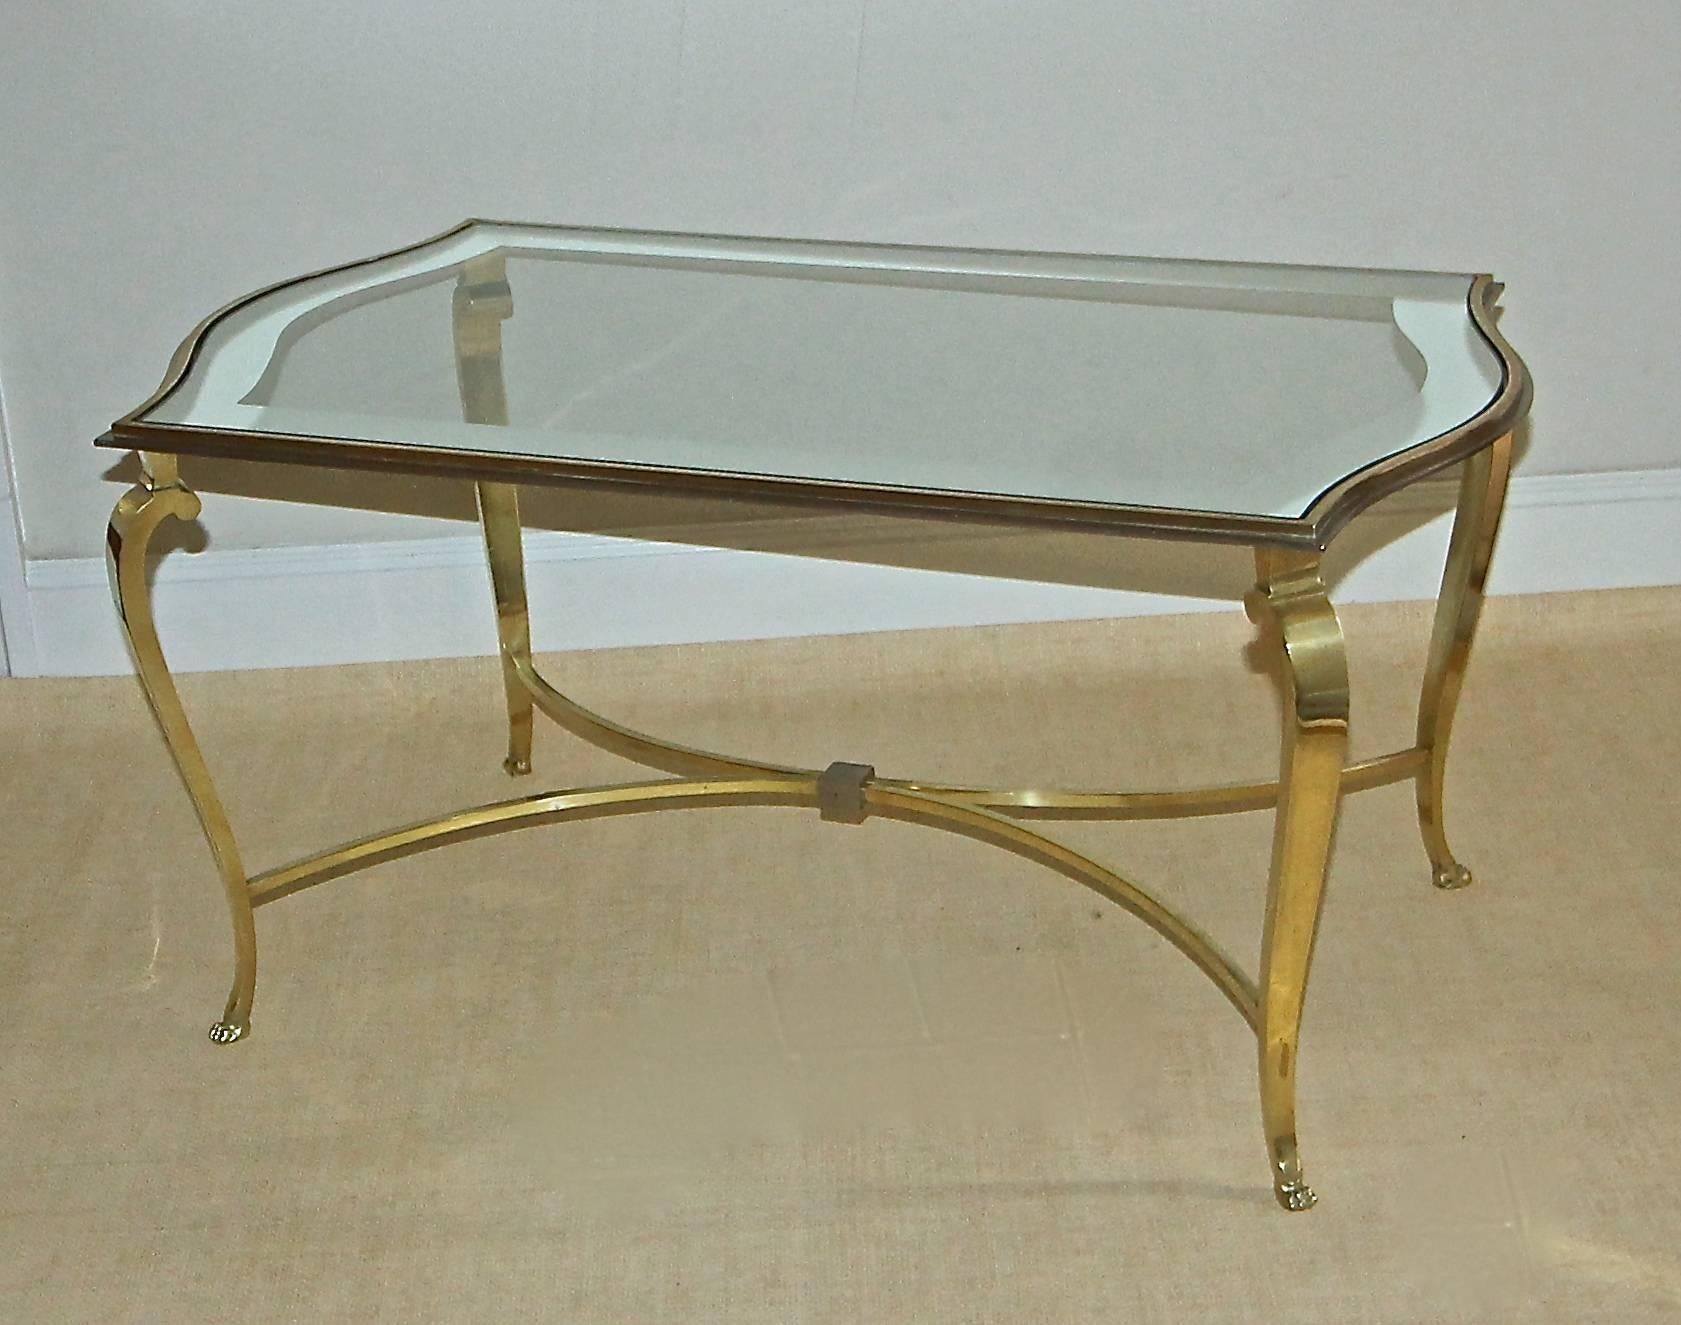 Hard to find bronze and nickel French coffee or cocktail table with glass mirrored edge inset top by Maision Ramsay. Exceptional quality and detailing including elegant bronze cabriolet legs resting on pawed feet. Table top is beautifully curved at